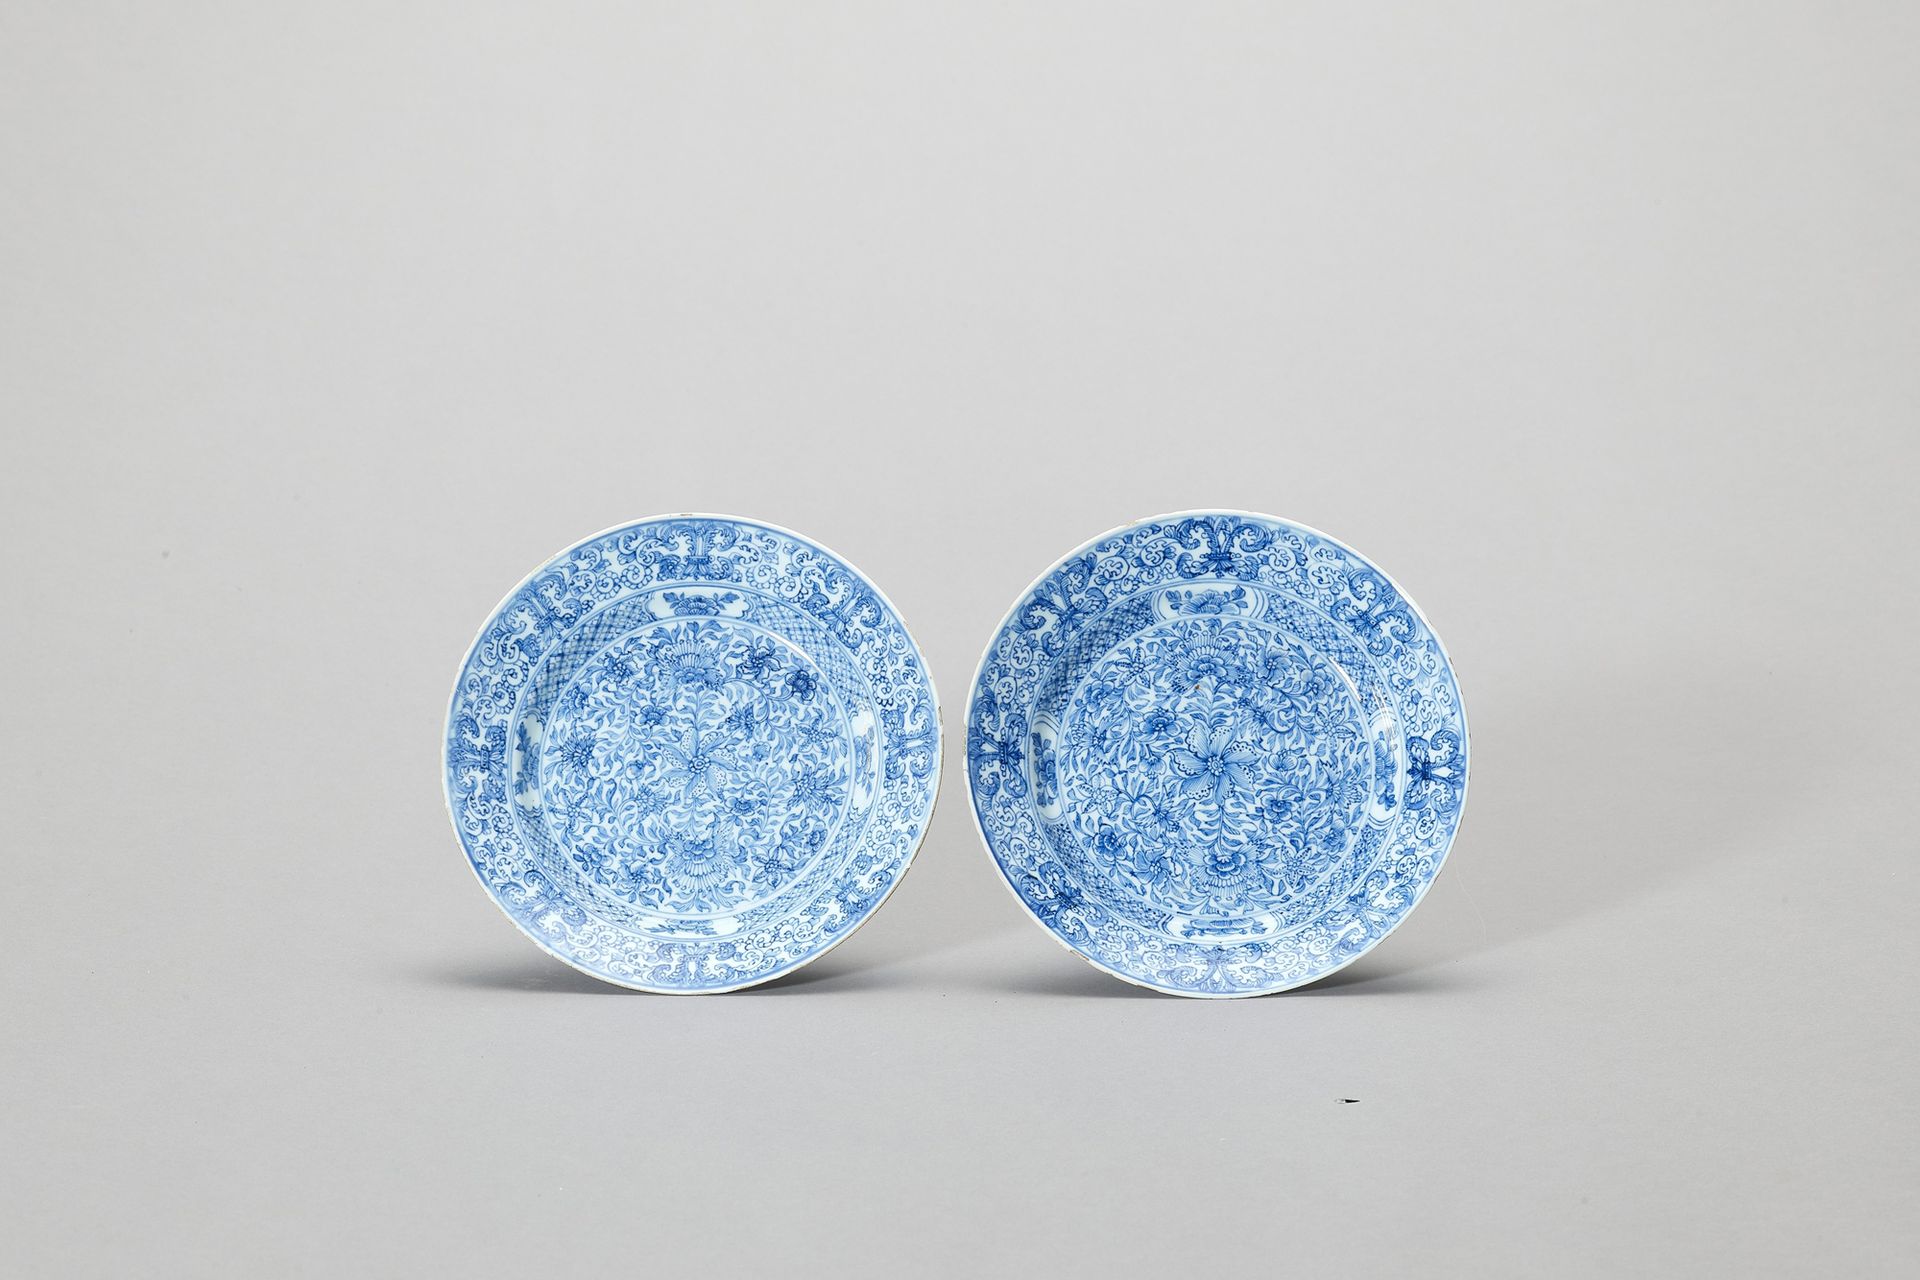 A PAIR OF ‘FLORAL SCROLL’ BLUE AND WHITE PORCELAIN DISHES COPPIA DI PIATTI IN PO&hellip;